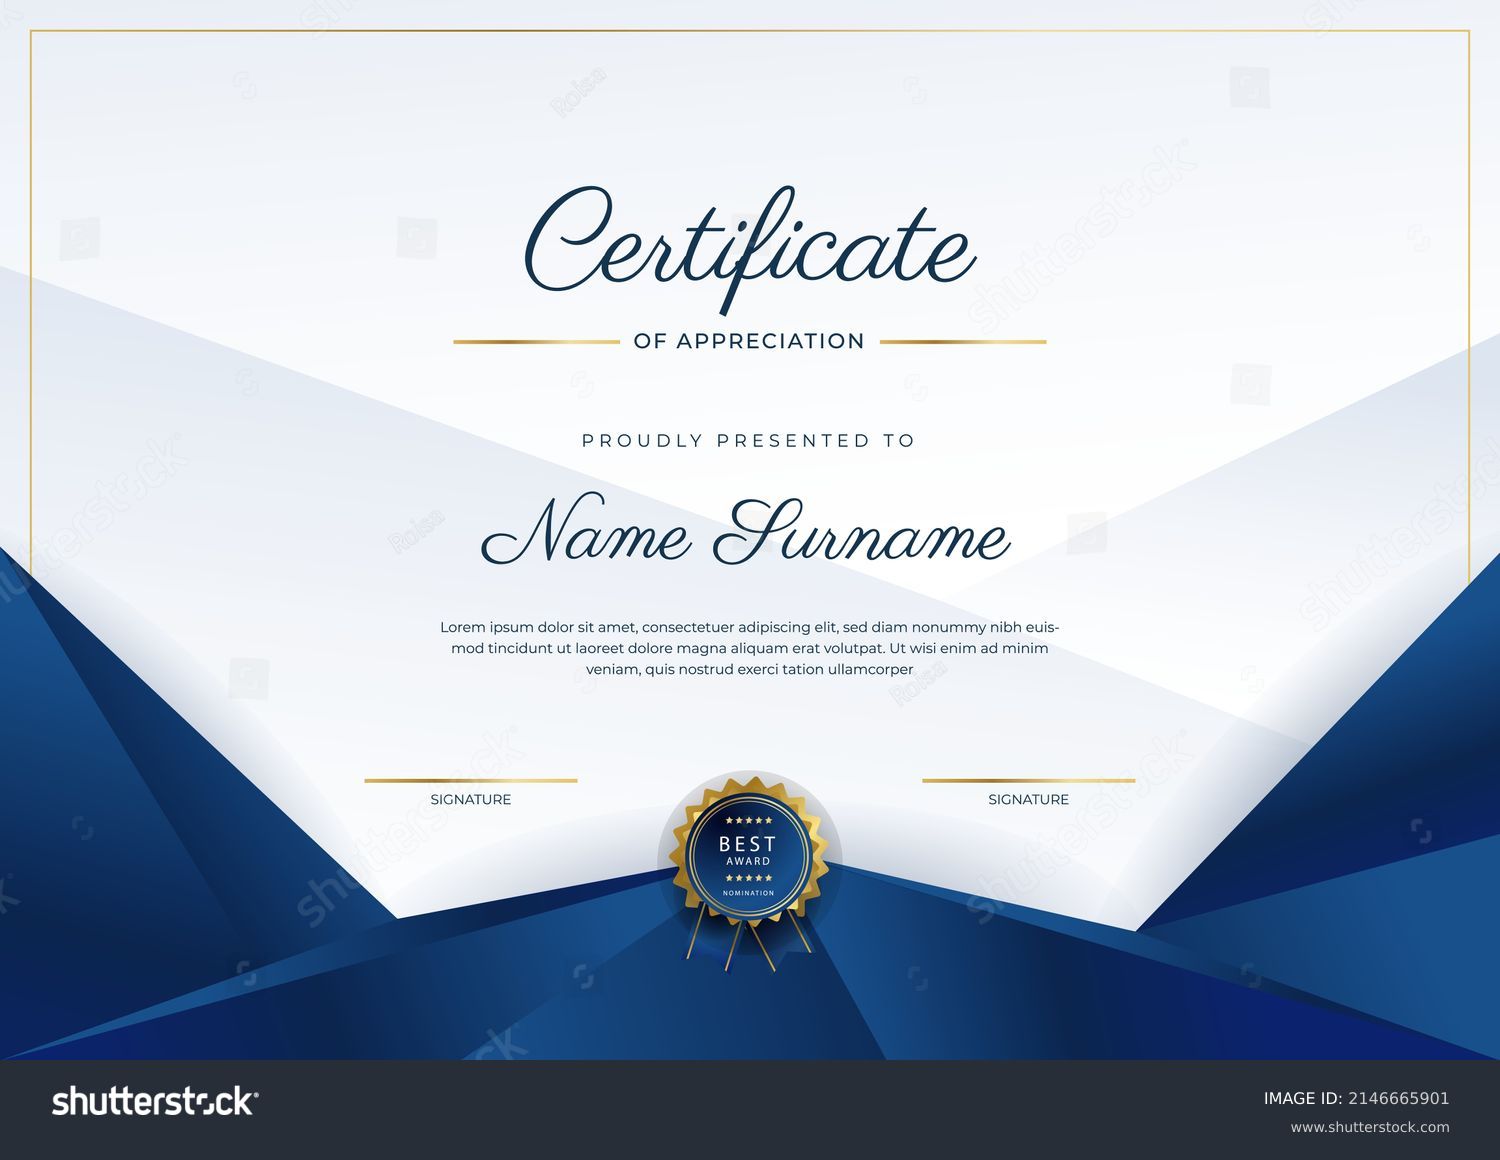 Certificate template with professional clean design. Vector illustration. Certificate of achievement abstract geometric texture decoration for multi-purpose business or education needs #2146665901